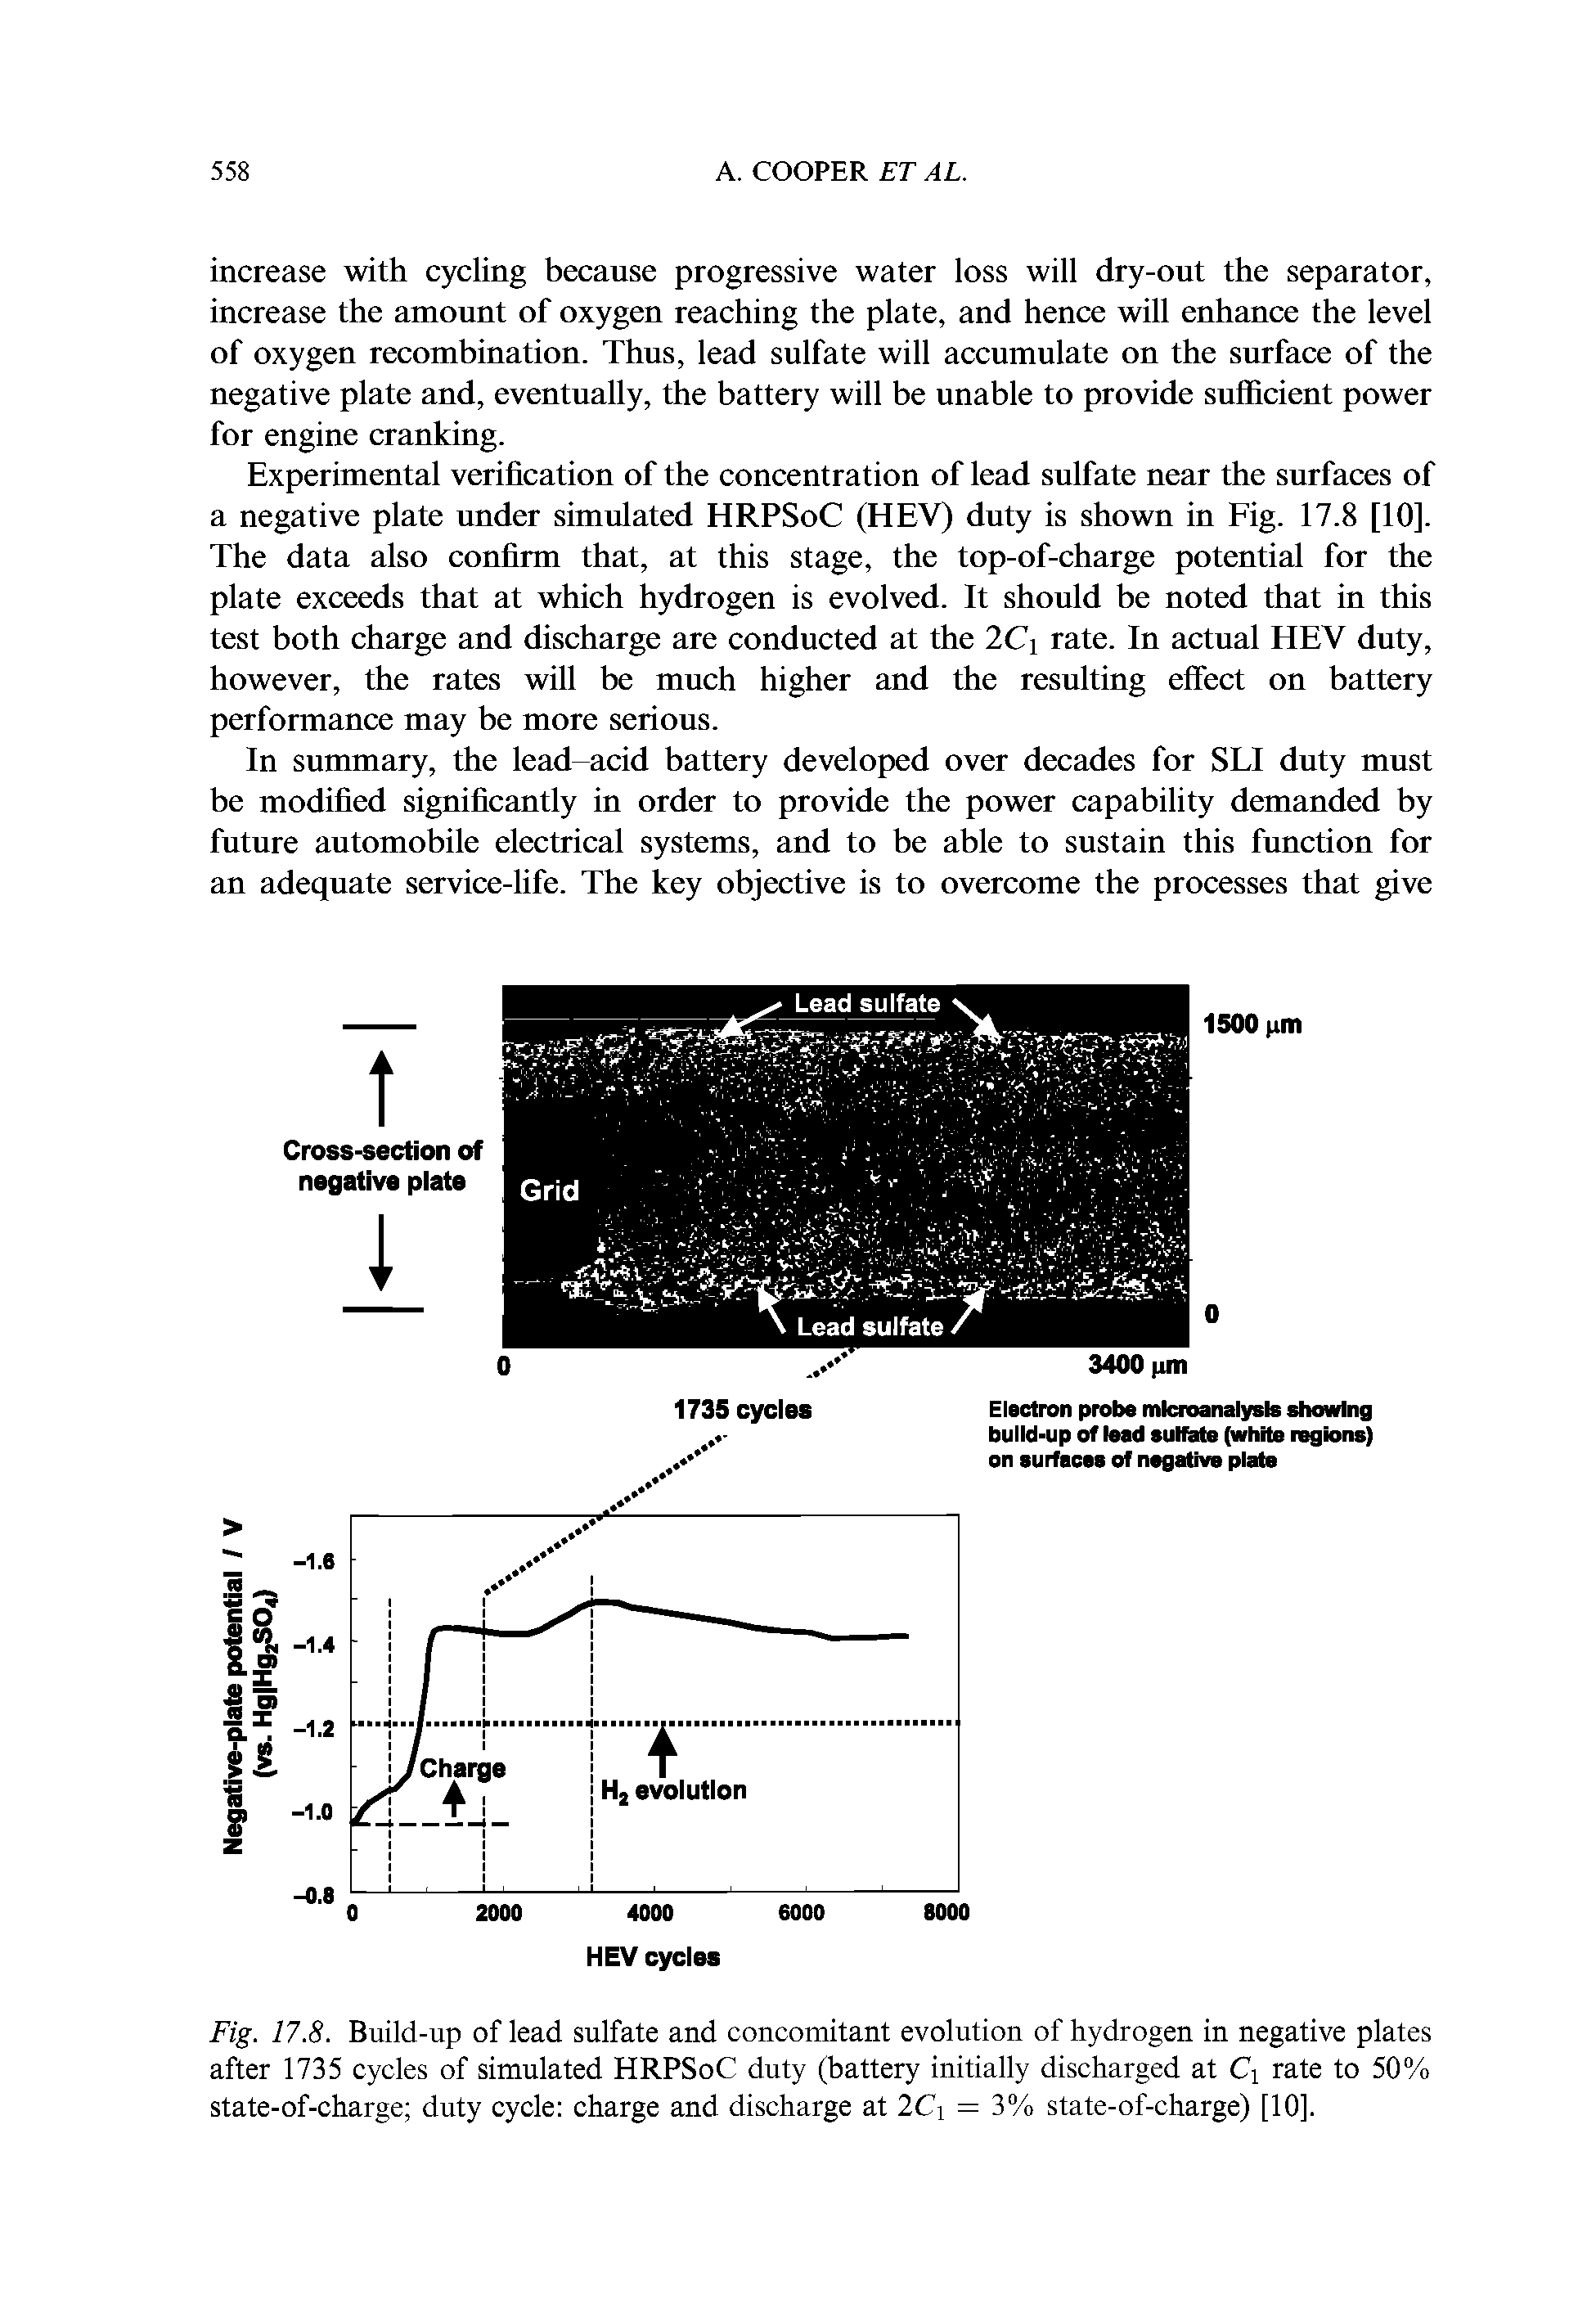 Fig. 17.8. Build-up of lead sulfate and concomitant evolution of hydrogen in negative plates after 1735 cycles of simulated HRPSoC duty (battery initially discharged at Ci rate to 50% state-of-charge duty cycle charge and discharge at 2Ci = 3% state-of-charge) [10].